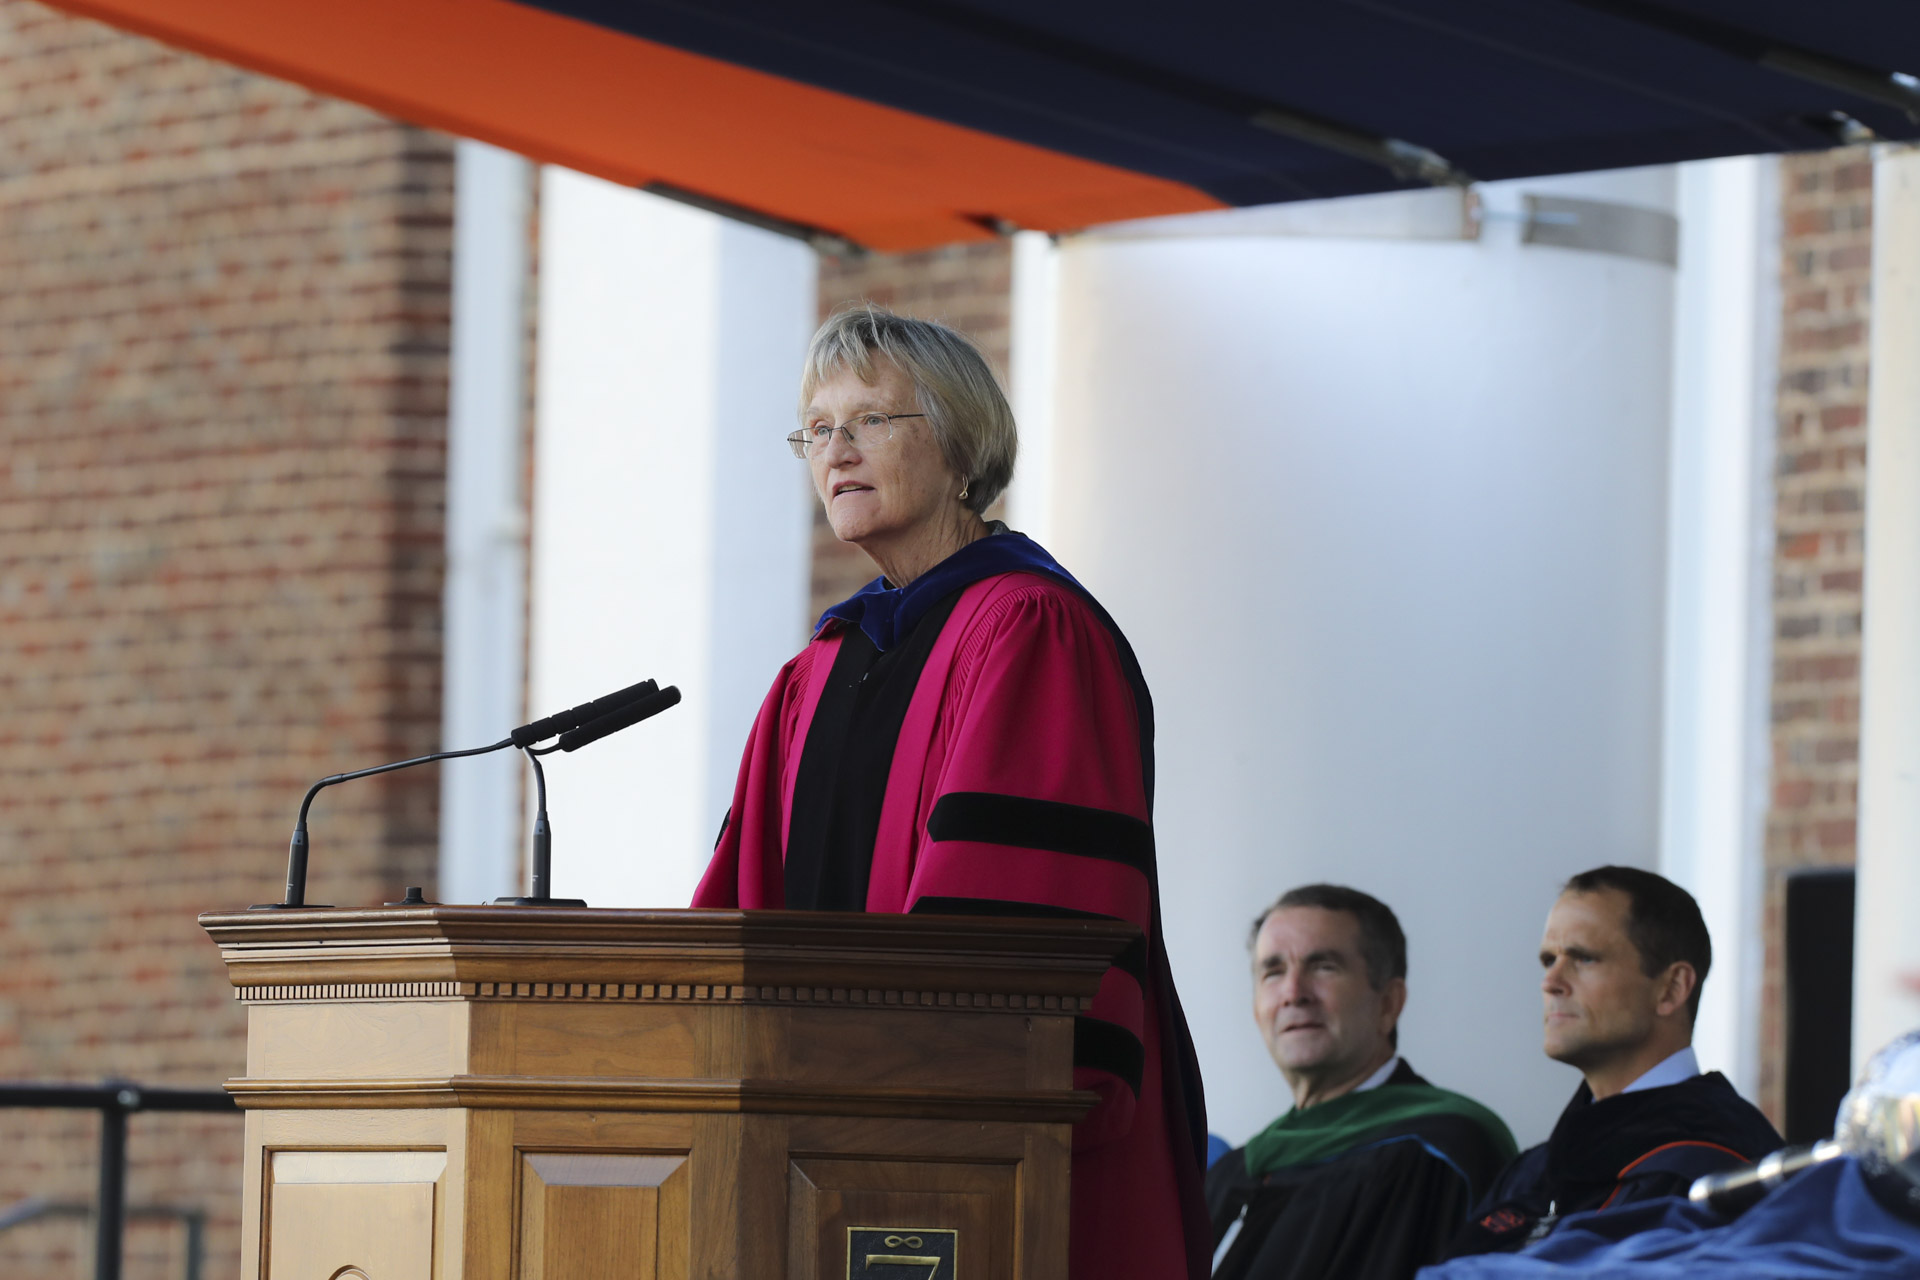 Drew Gilpin Faust stands at the podium to give a speech